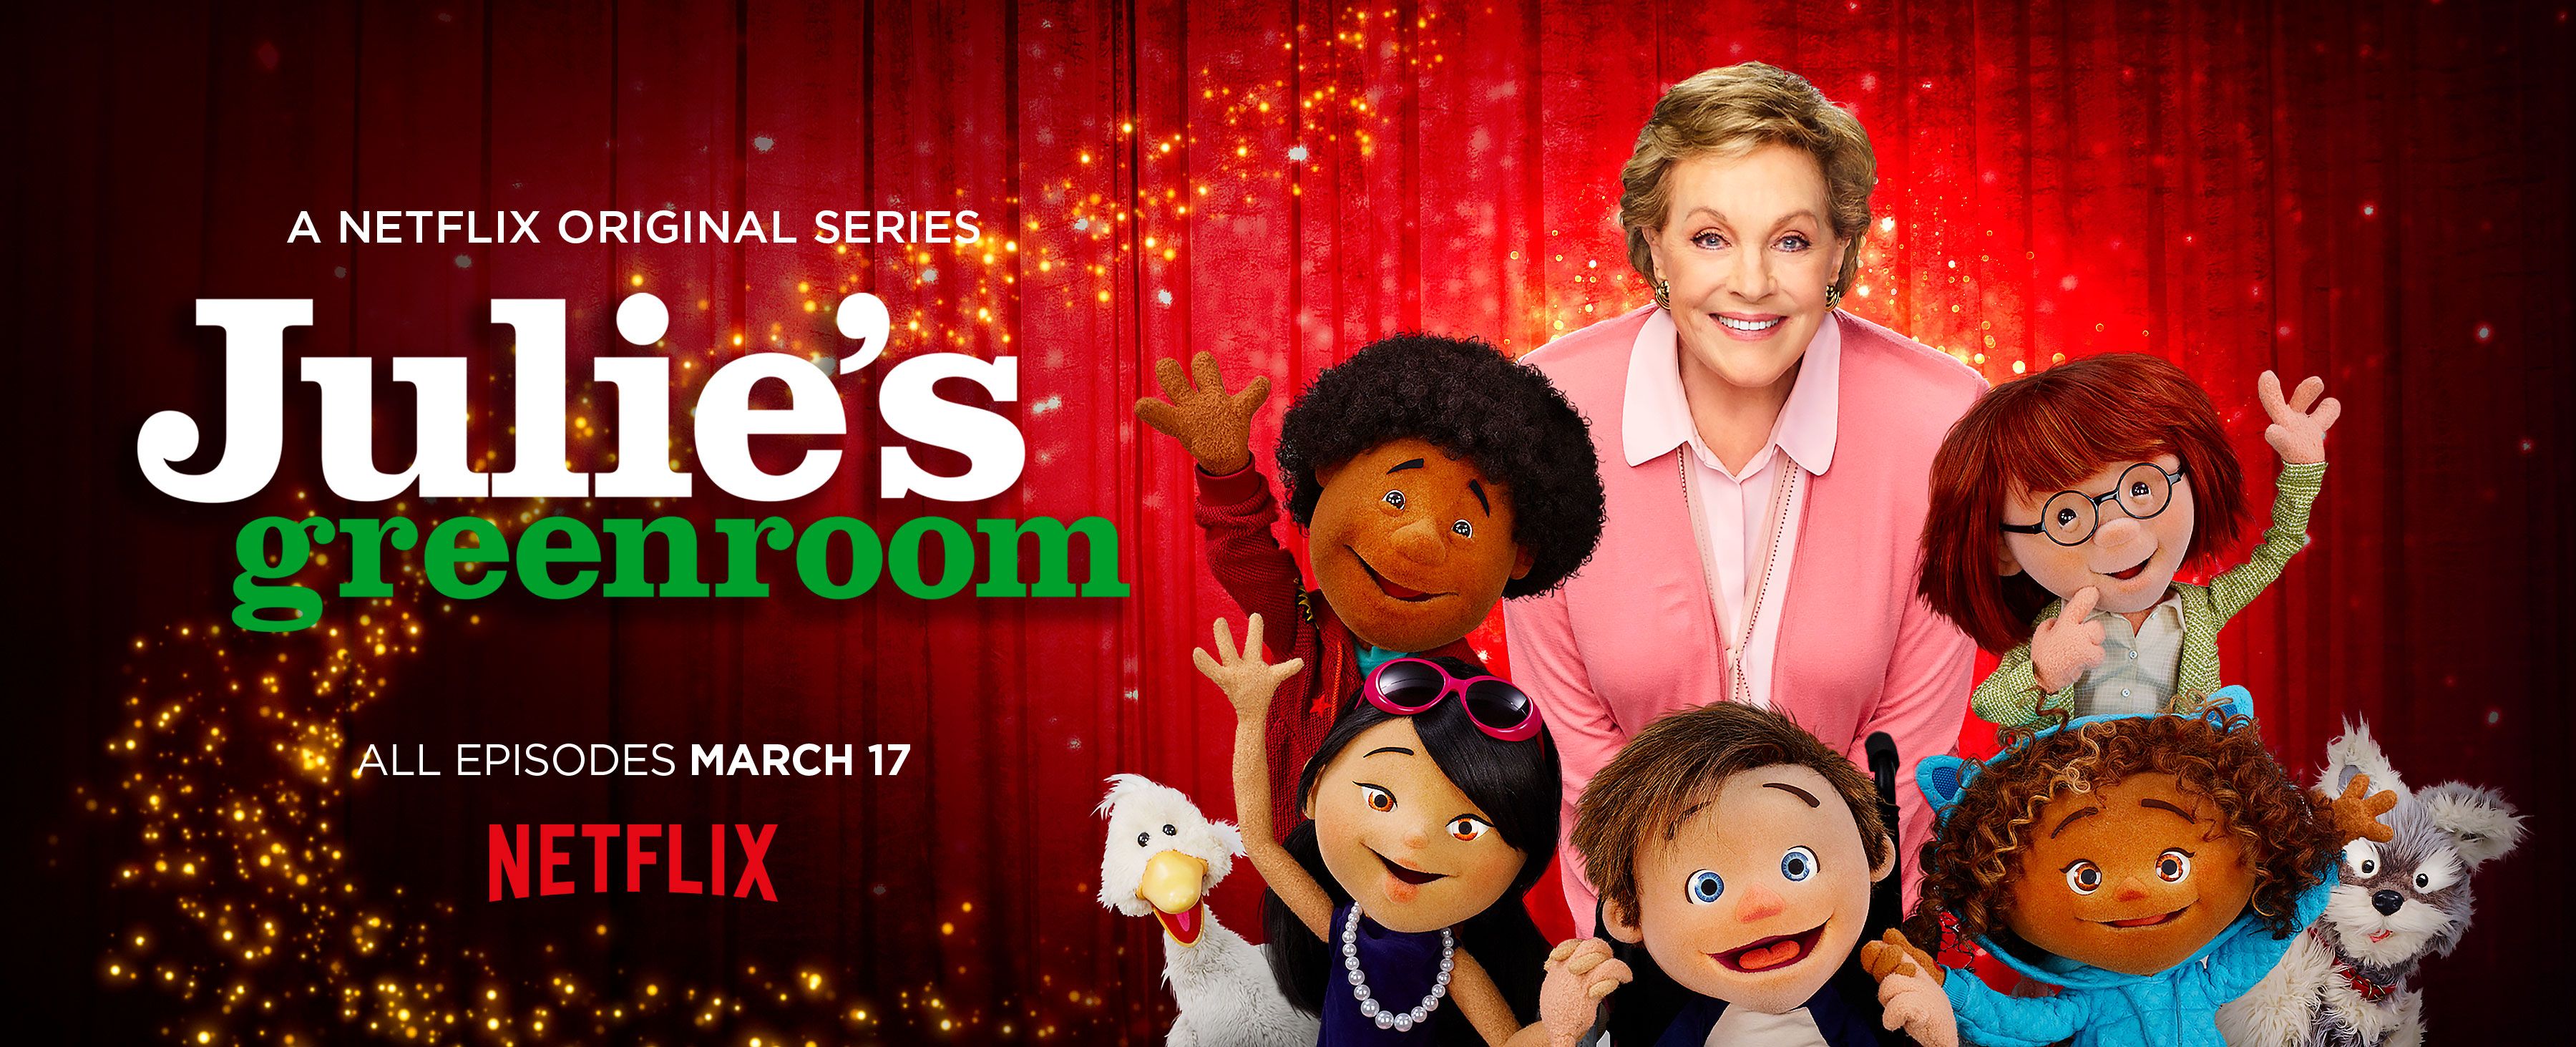 Julie’s Greenroom to Air on Netflix March 17!